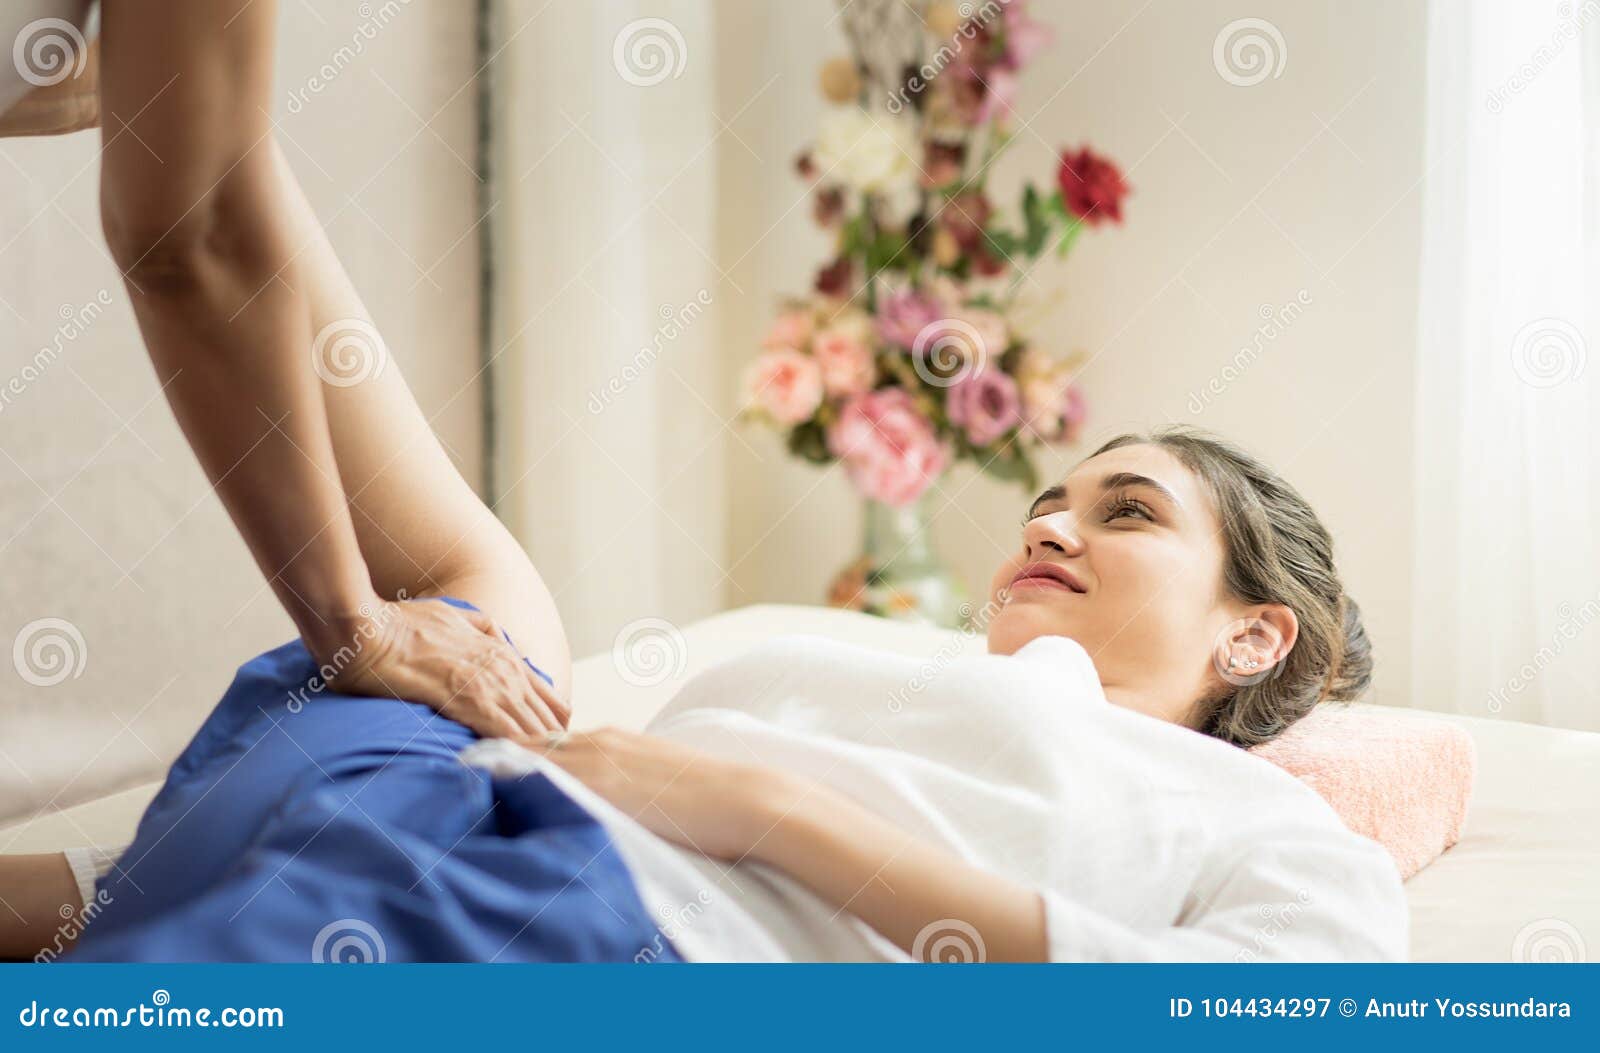 Woman Getting Leg Stretching In Thai Massage Spa Stock Image Image Of